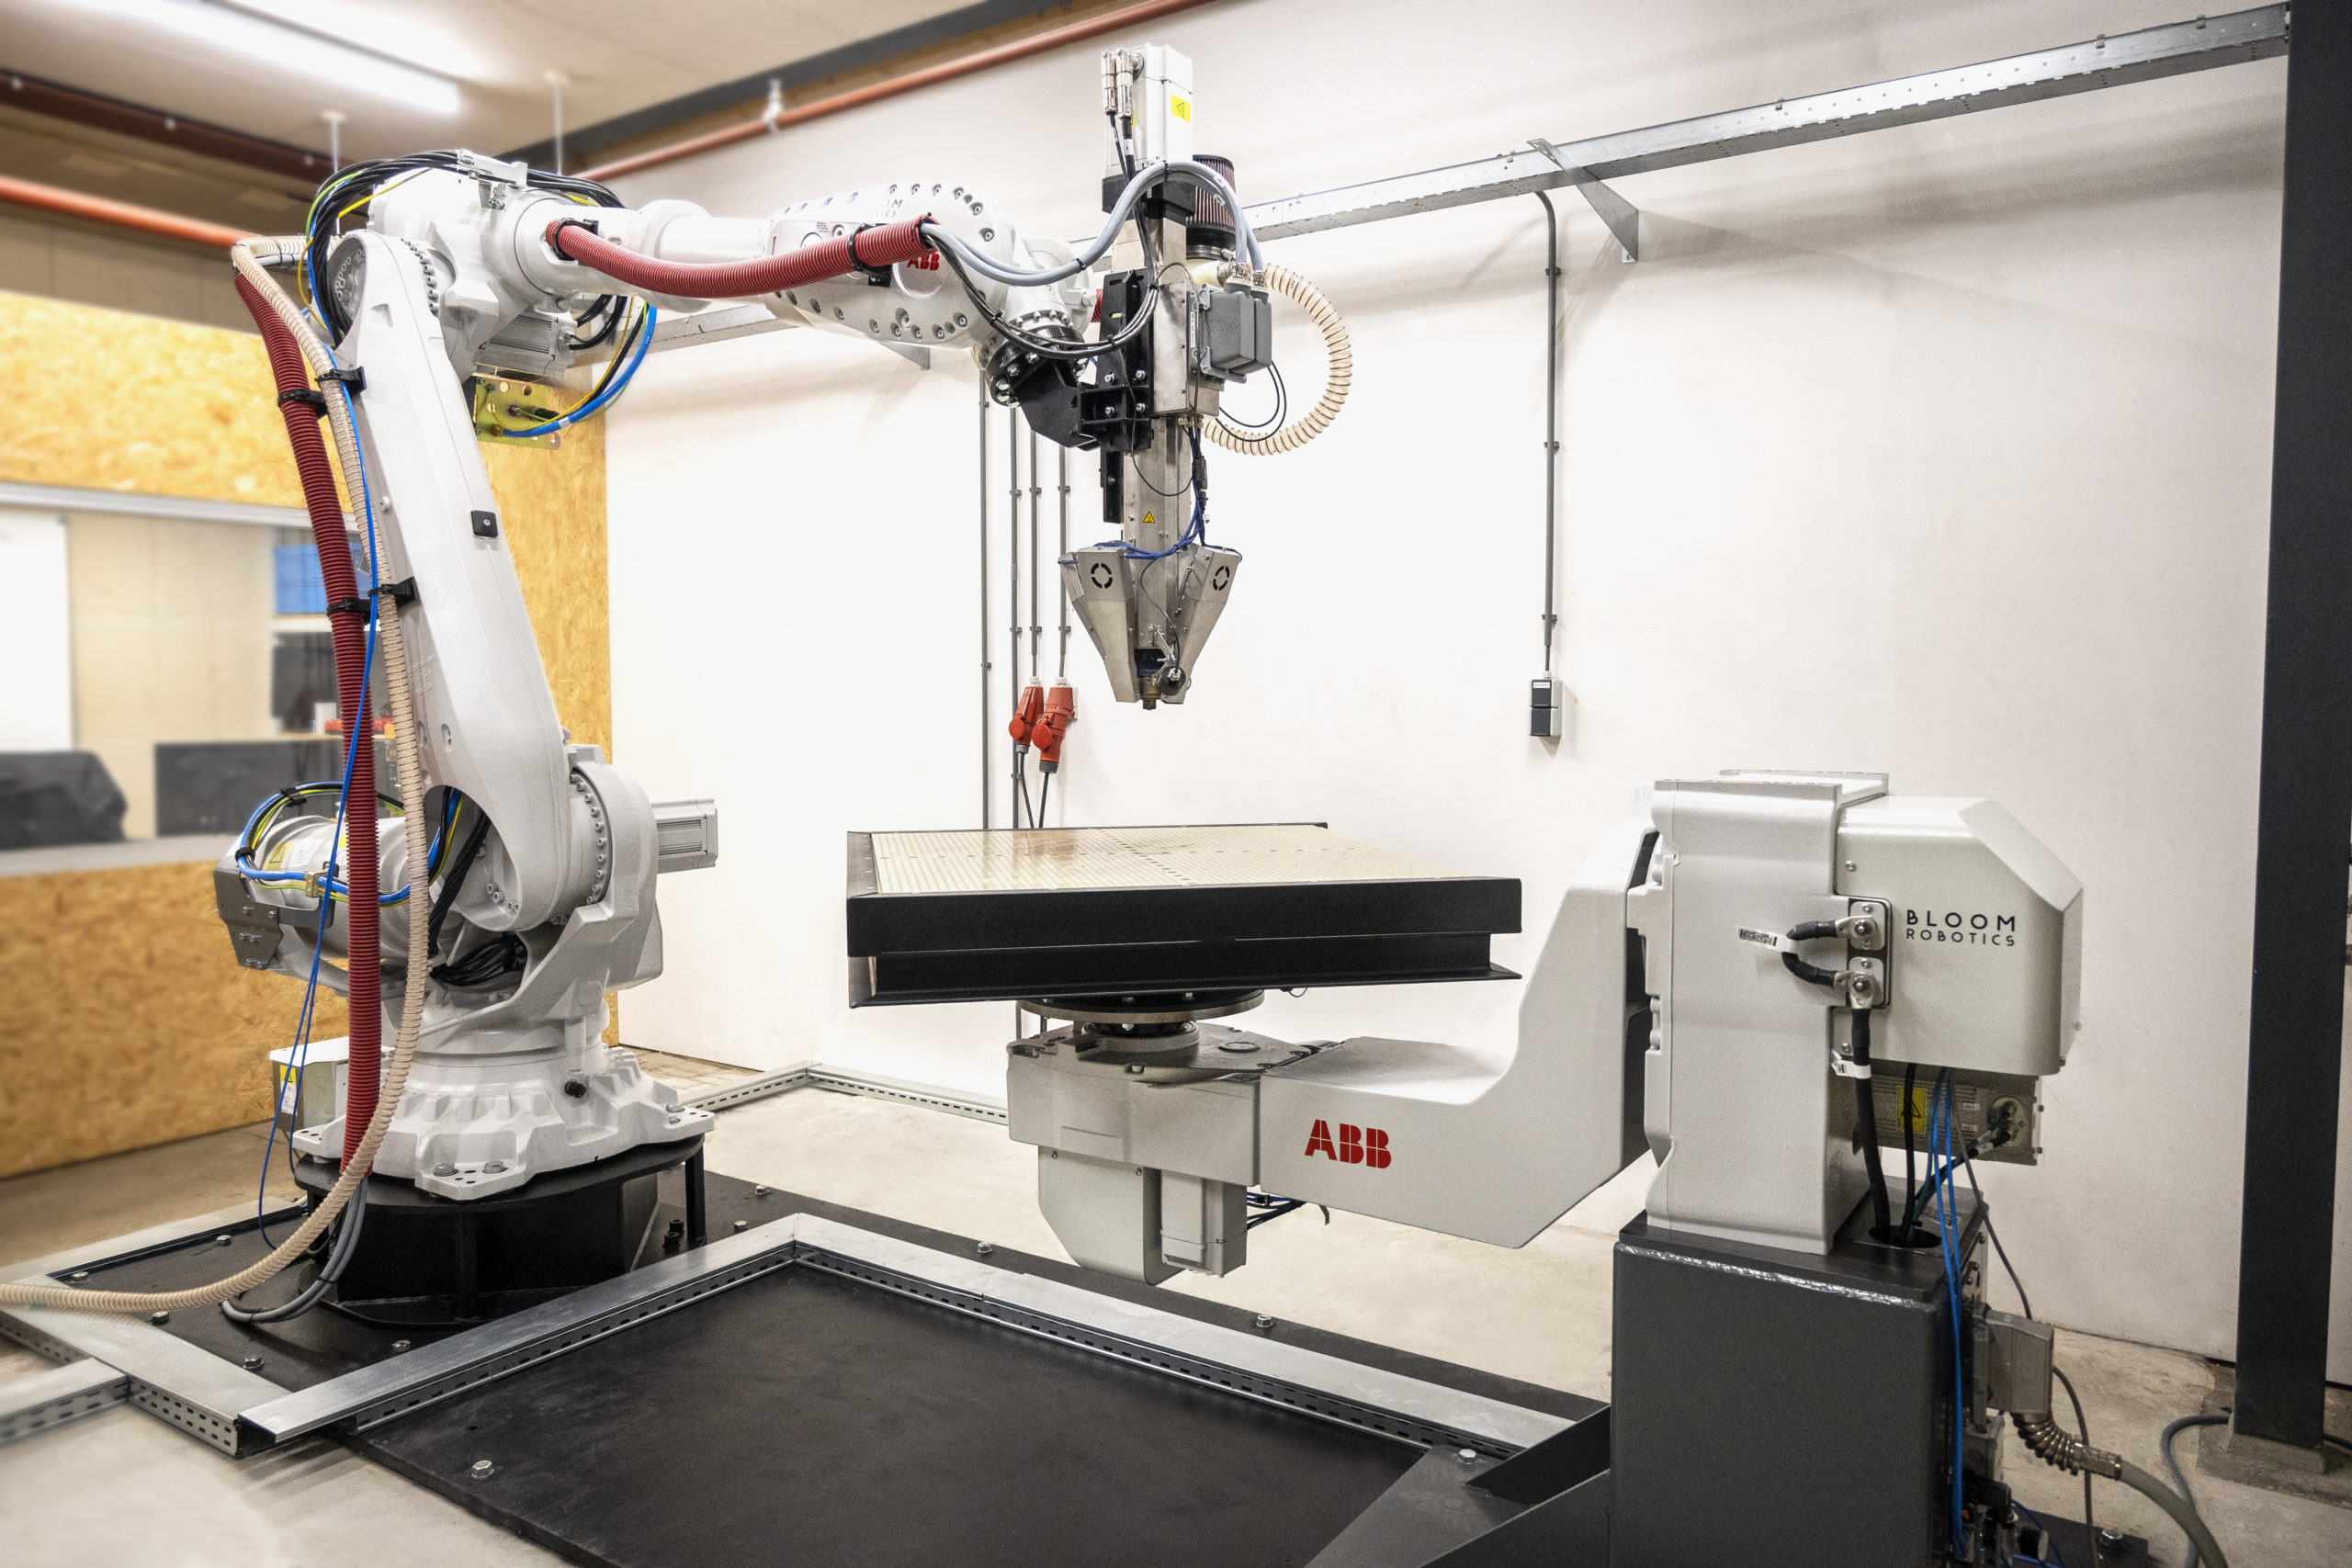 Additive manufacturing system large scale 3d-printer